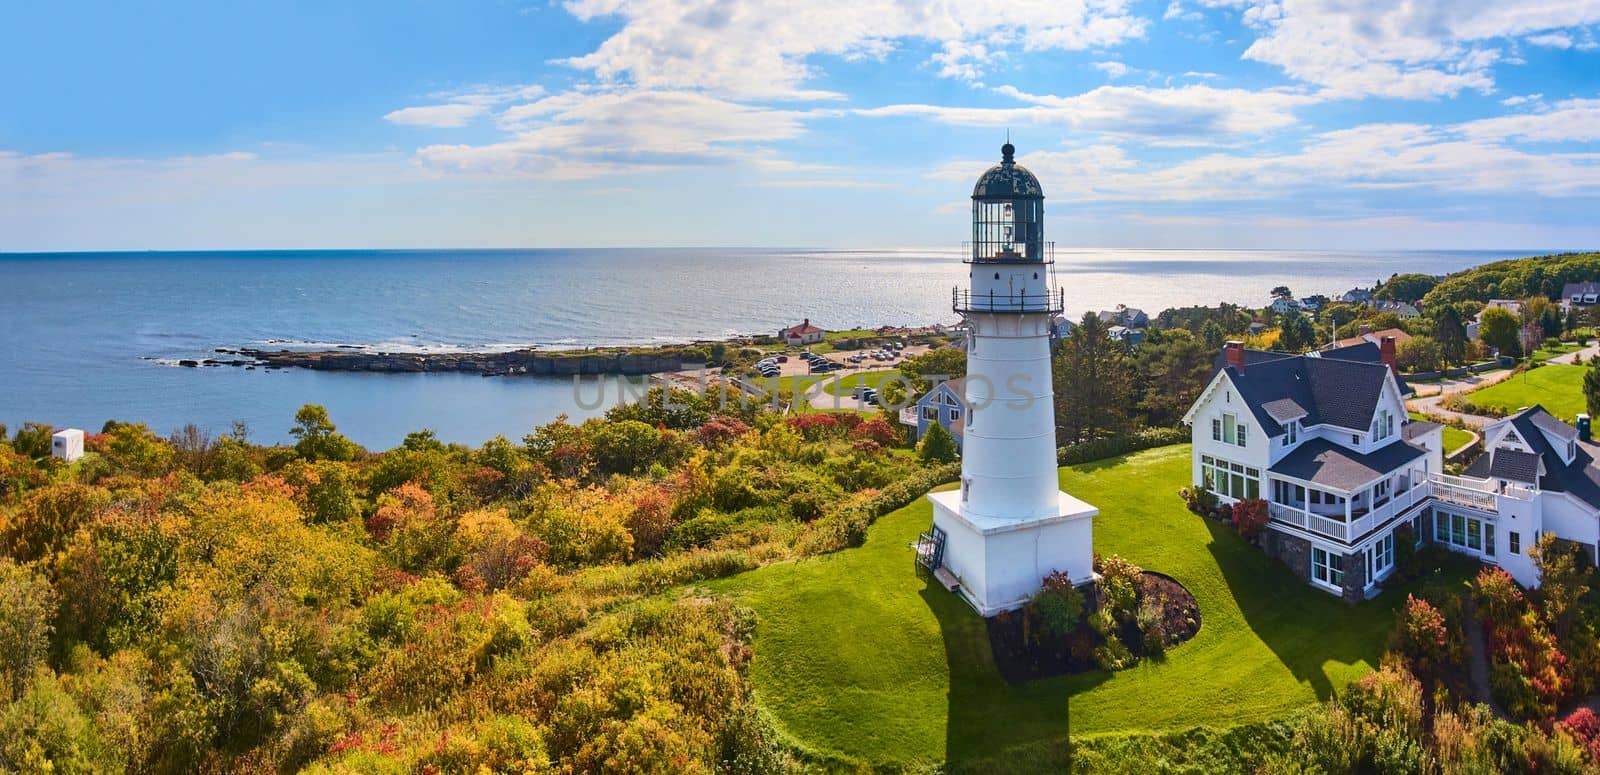 Lighthouse on hill with house overlooking stunning Maine coastline in fall by njproductions